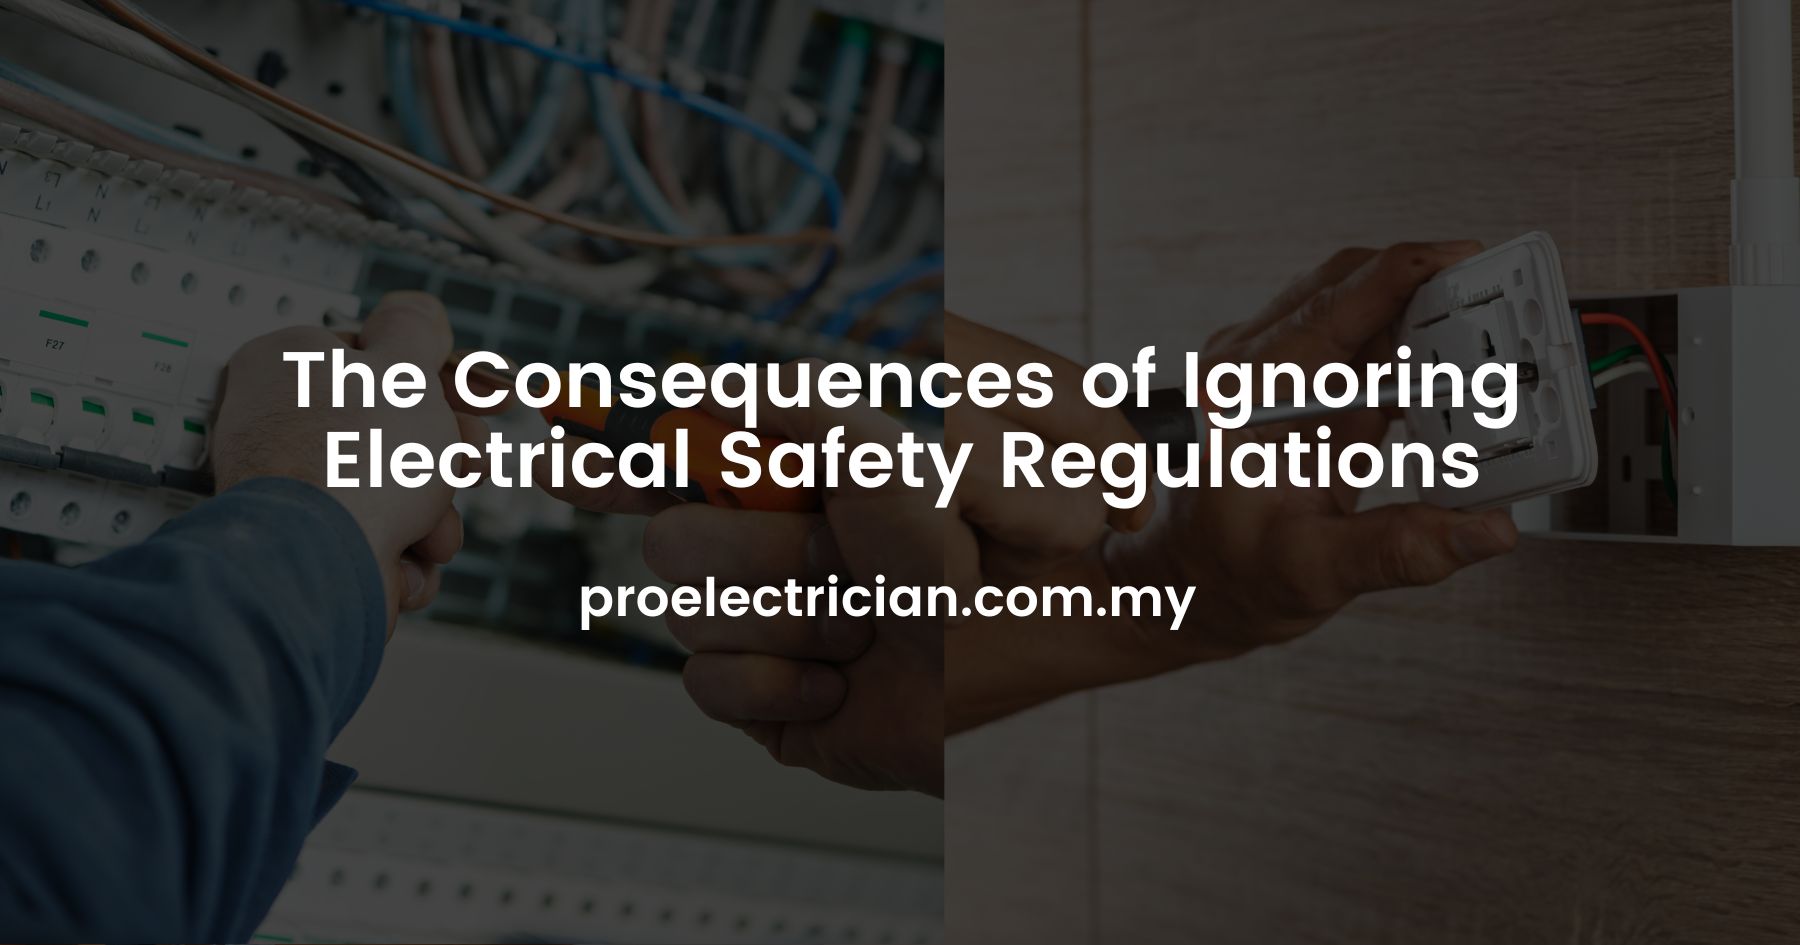 The Consequences of Ignoring Electrical Safety Regulations